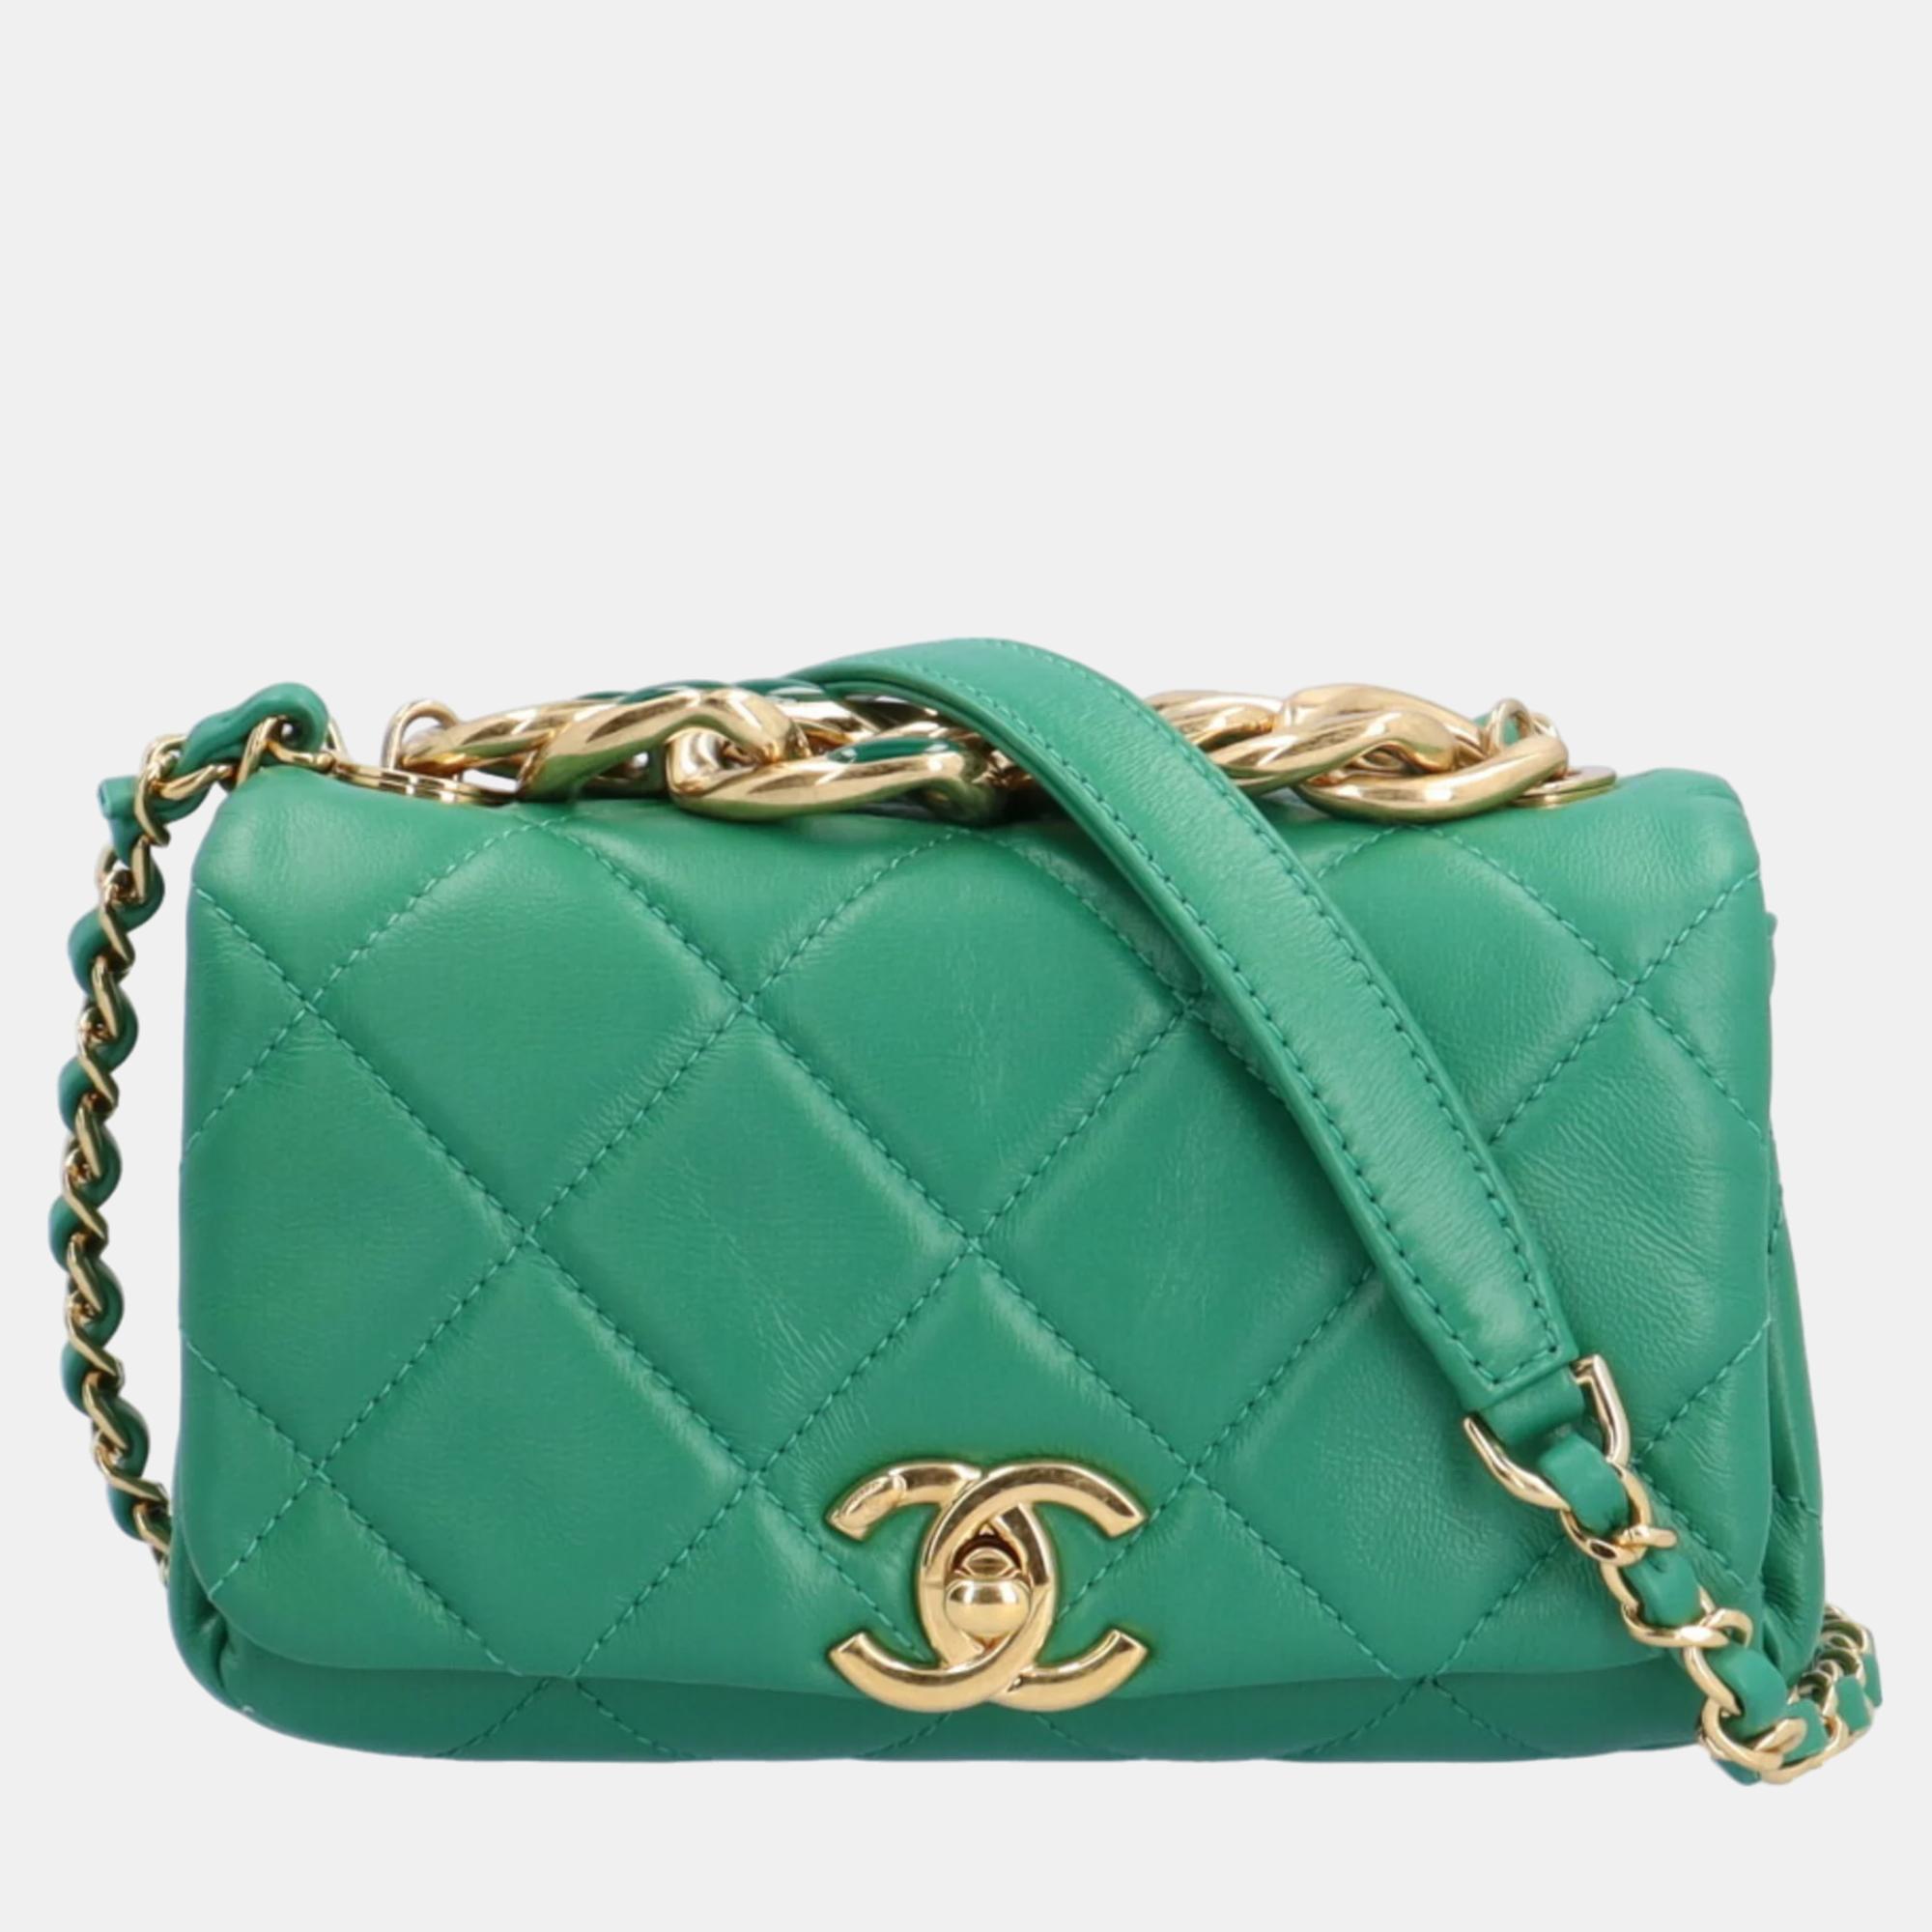 Chanel green lambskin quilted color match mini flap bag